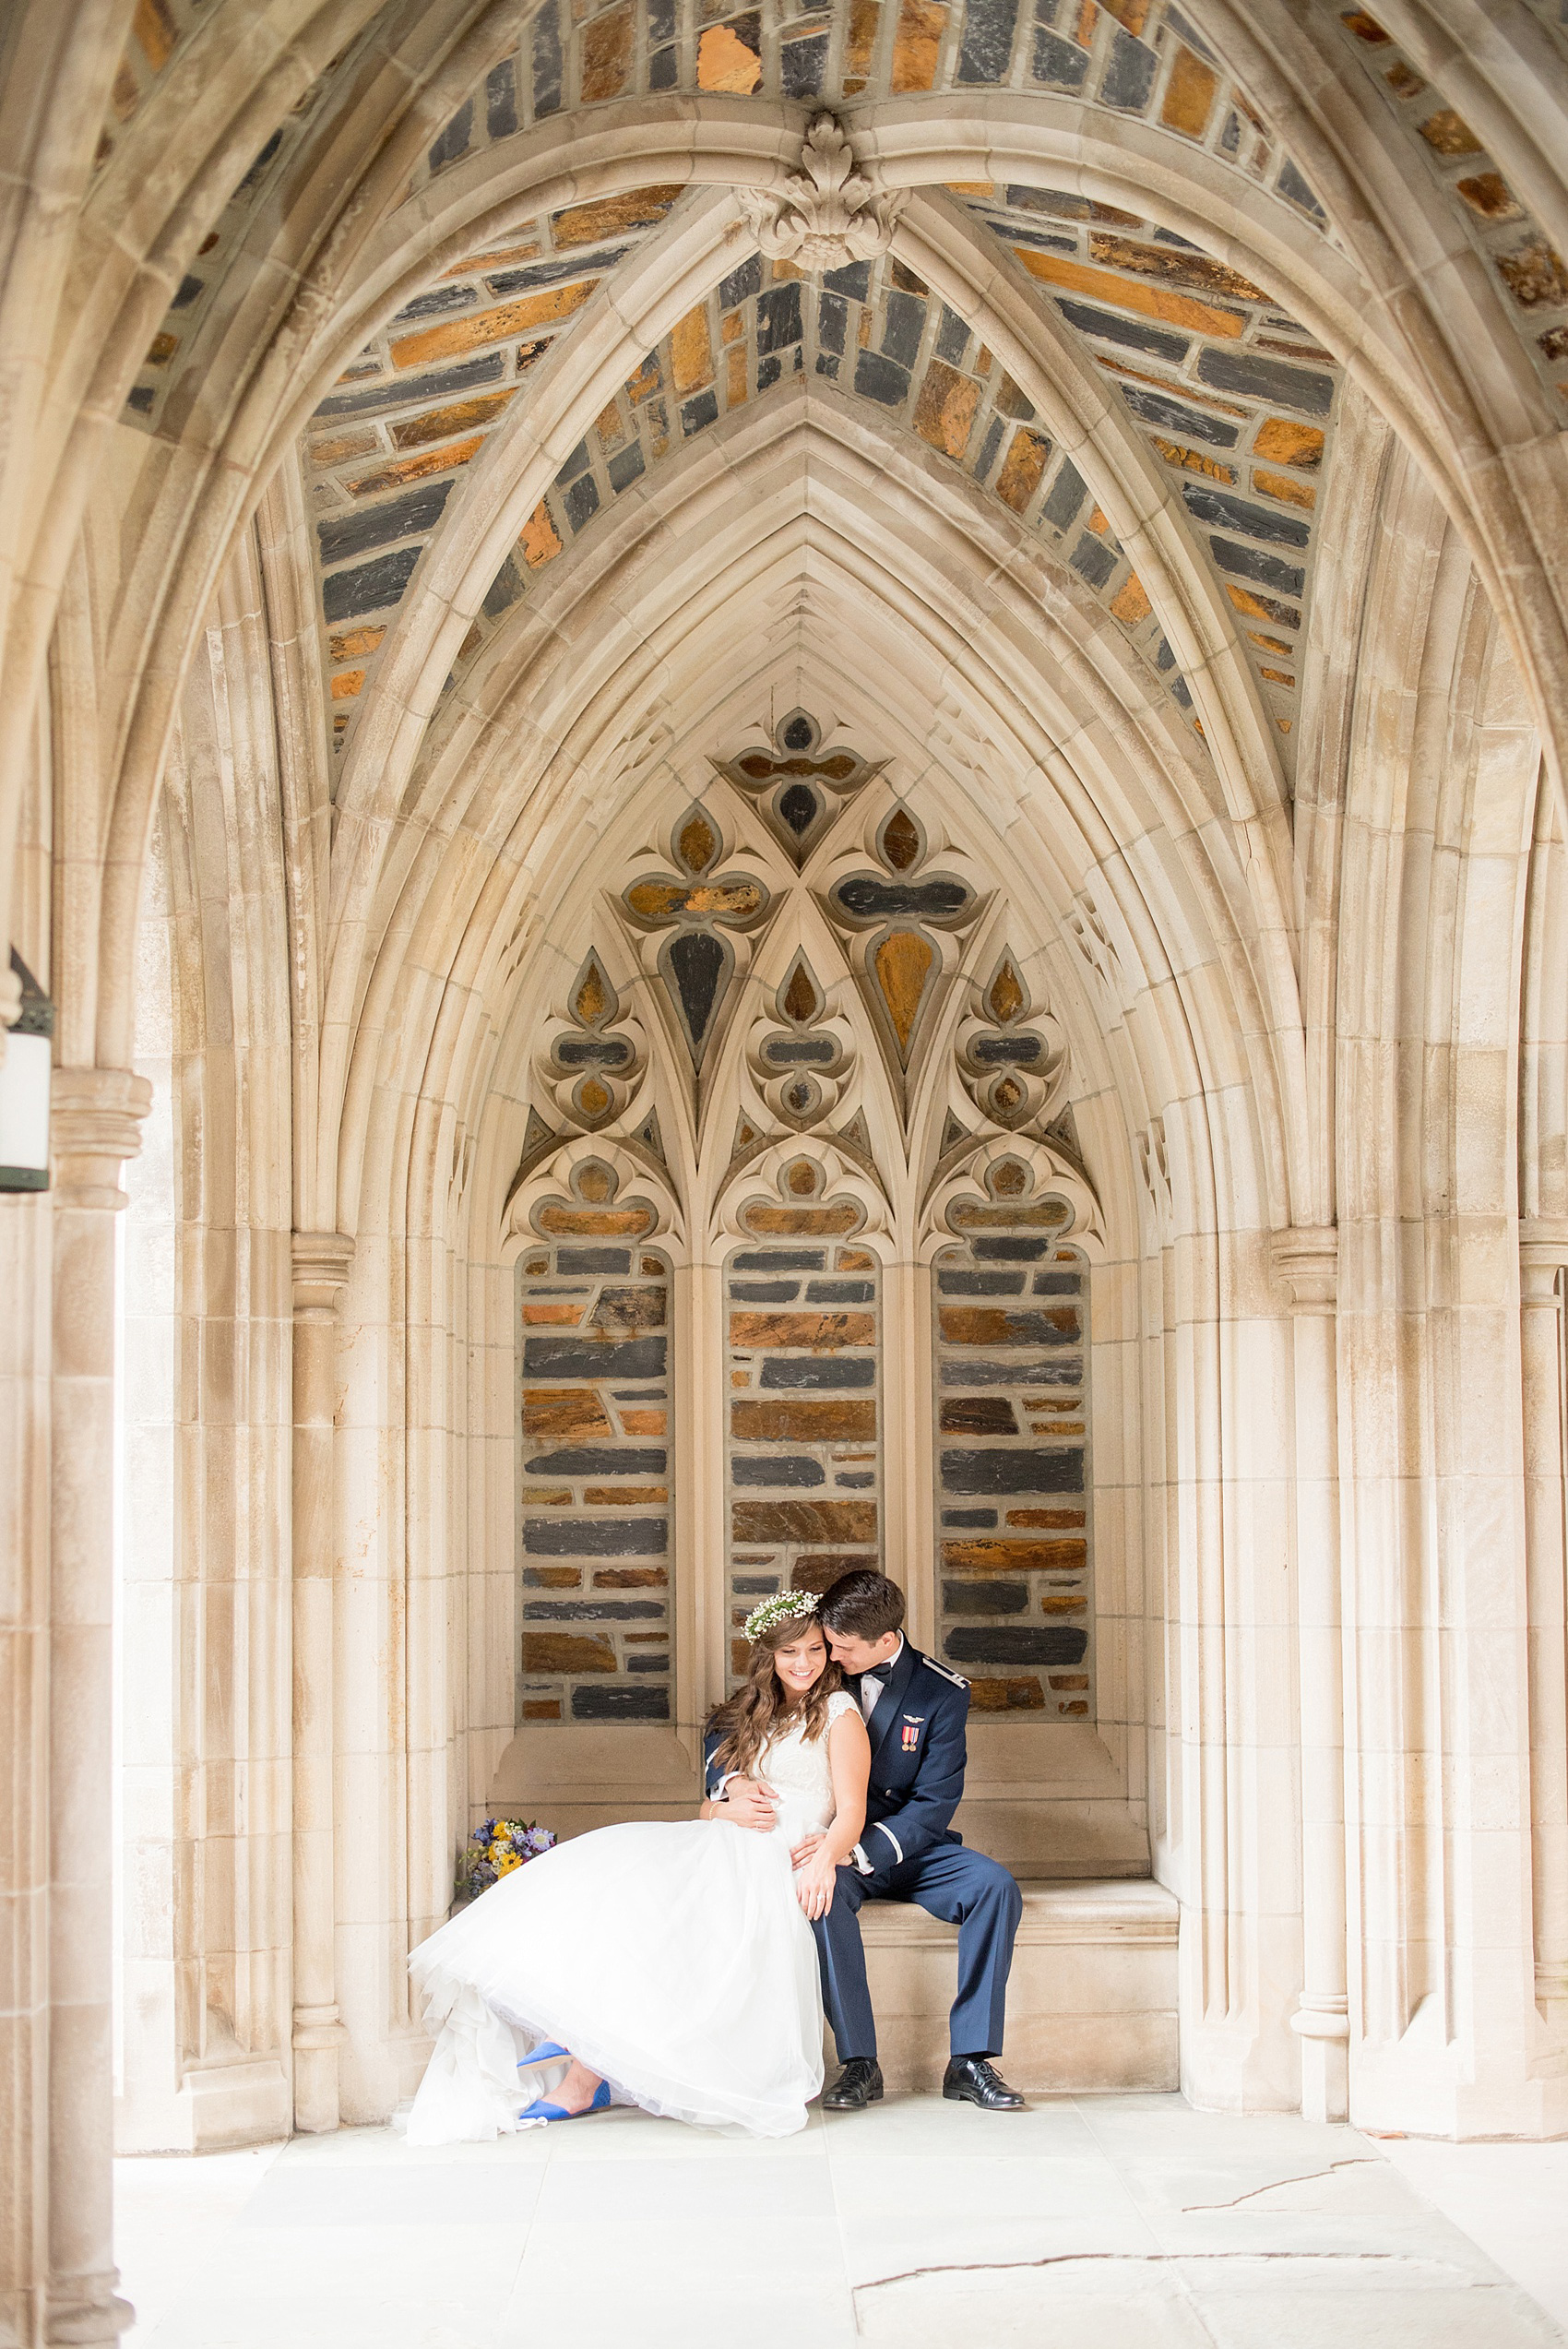 Mikkel Paige Photography photo of a Duke Chapel wedding in Durham, North Carolina. The bride in her Baby's Breath floral crown and groom in his navy blue Air Force uniform.